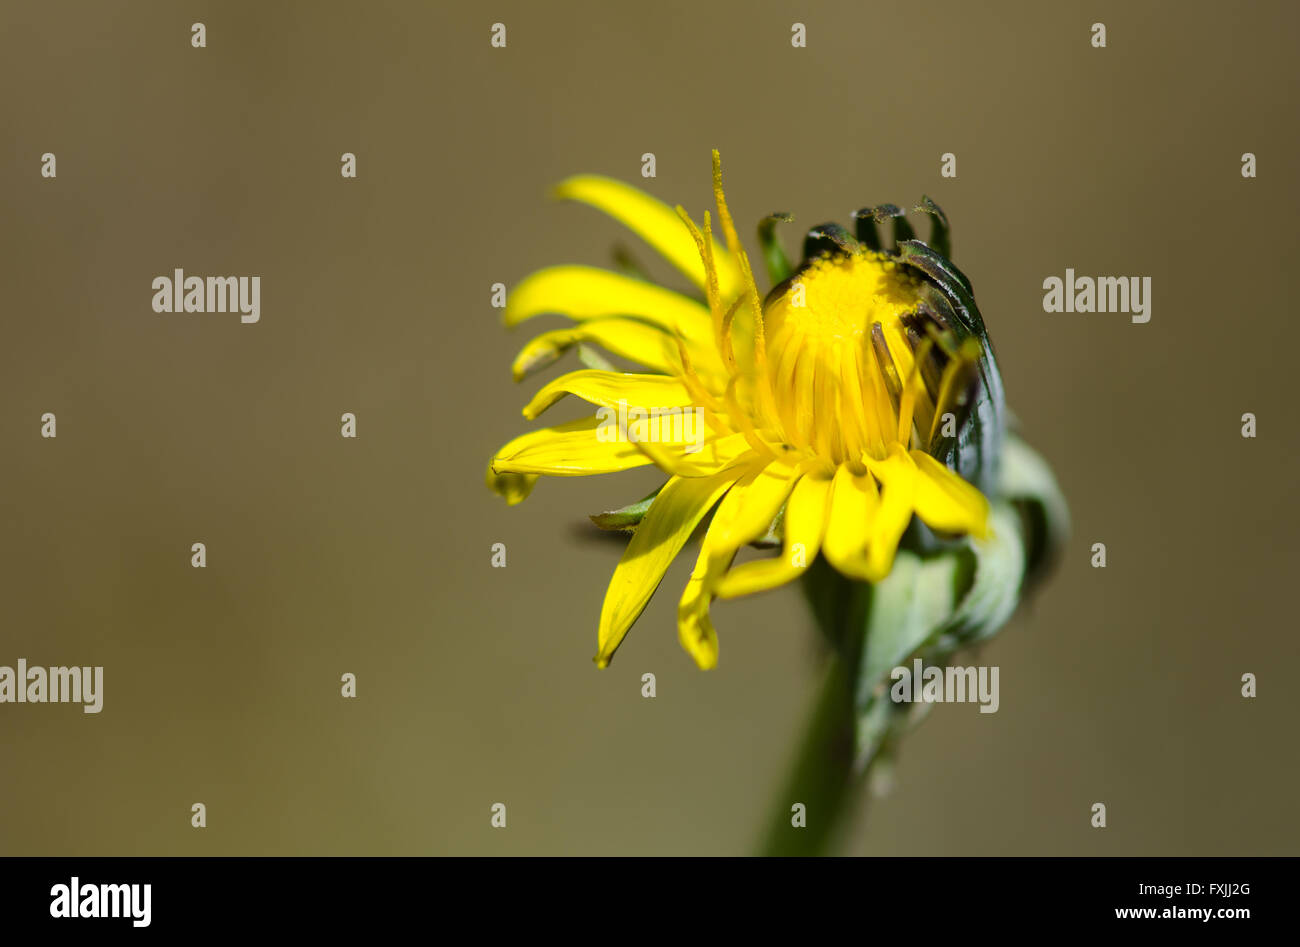 Dandelion (Taraxacum officinale agg.) flower half open. Yellow plant in the daisy family (Asteraceae), blossoming asymmetrically Stock Photo